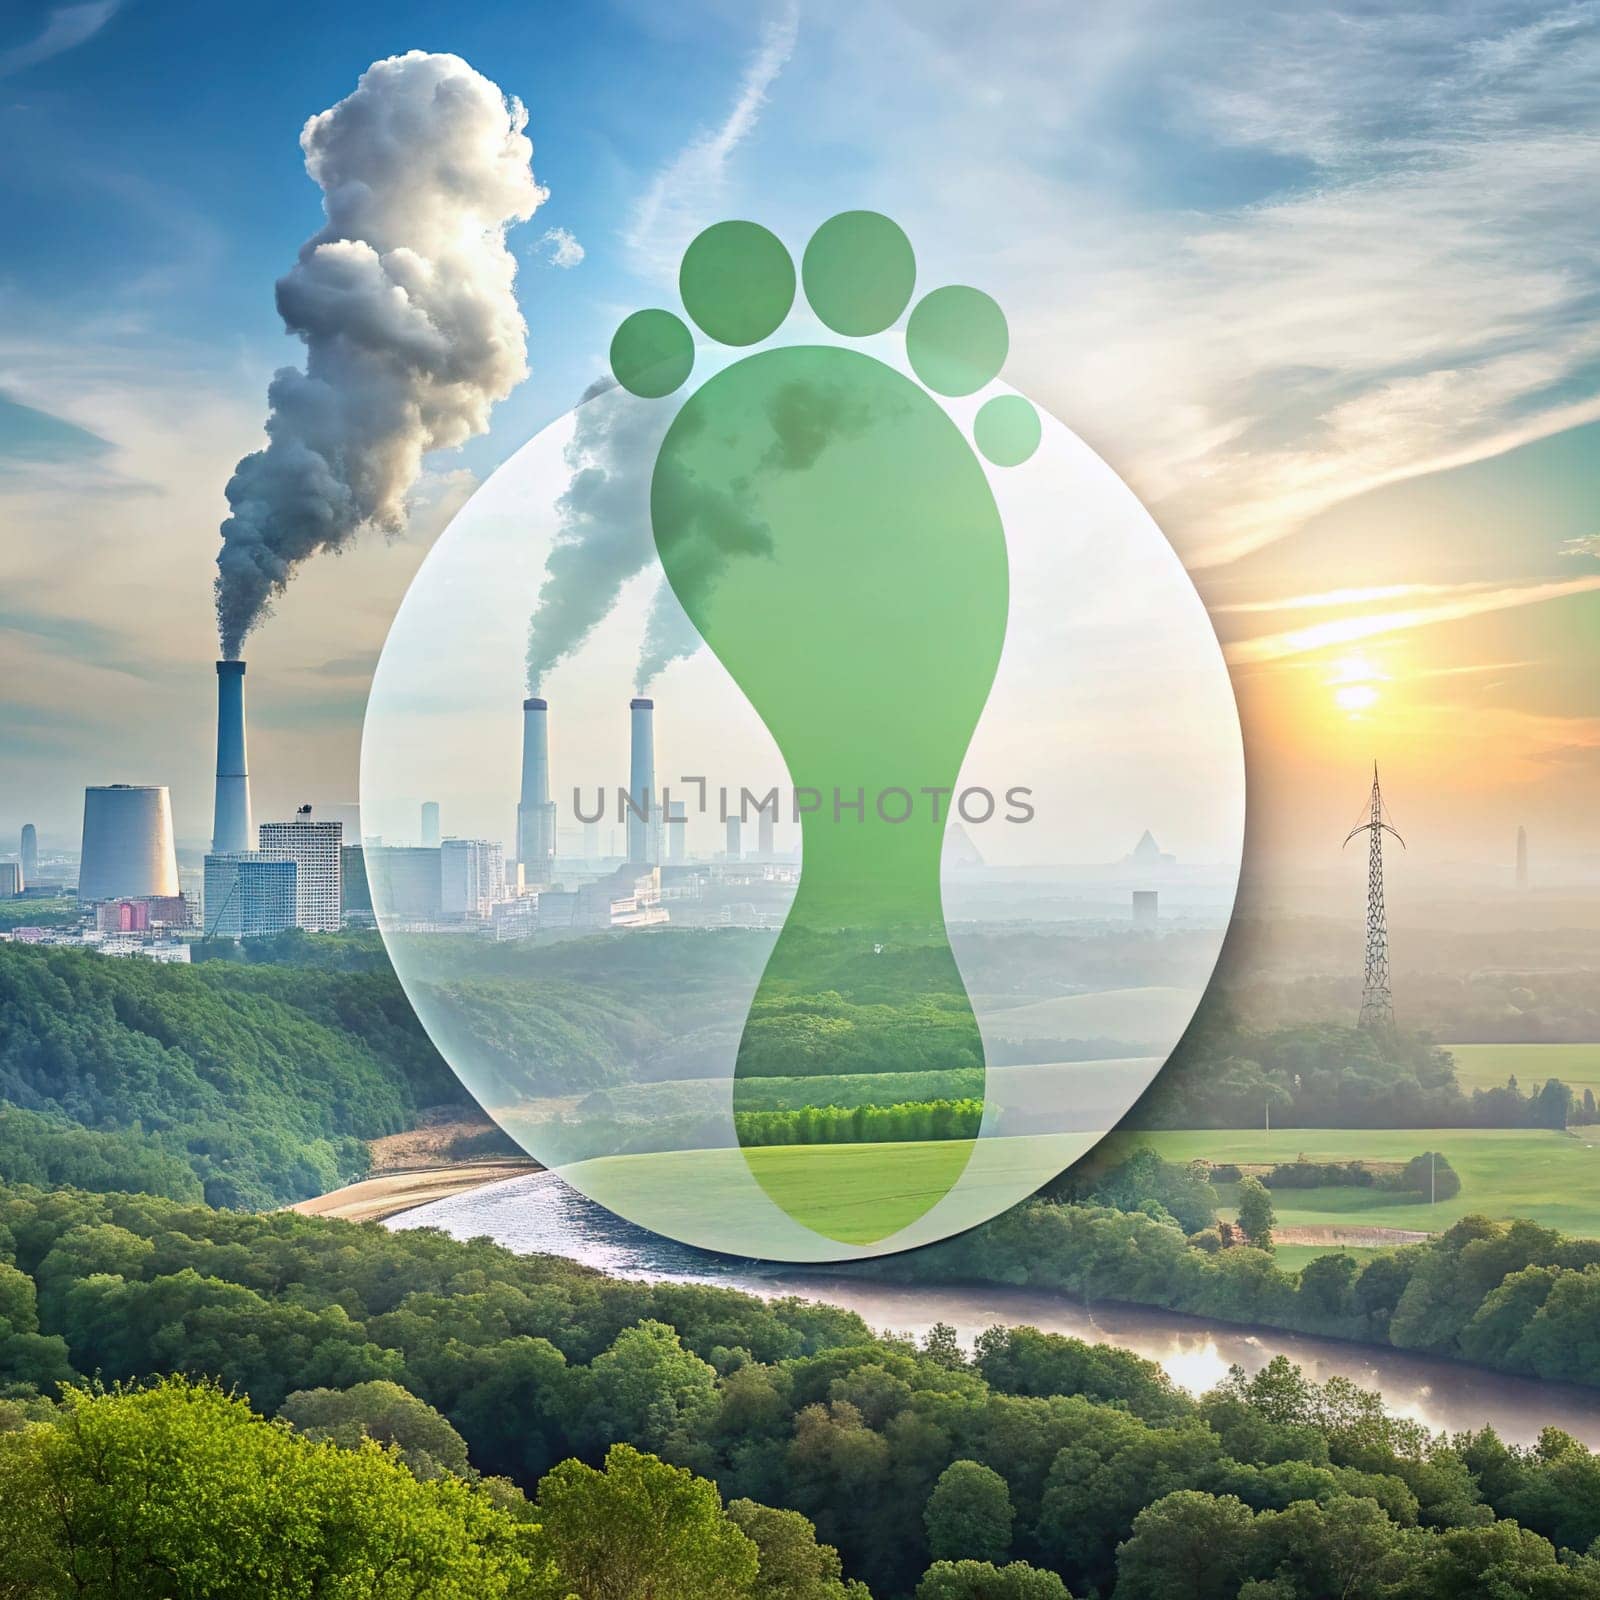 Carbon footprint that endangers natural life by causing global warming